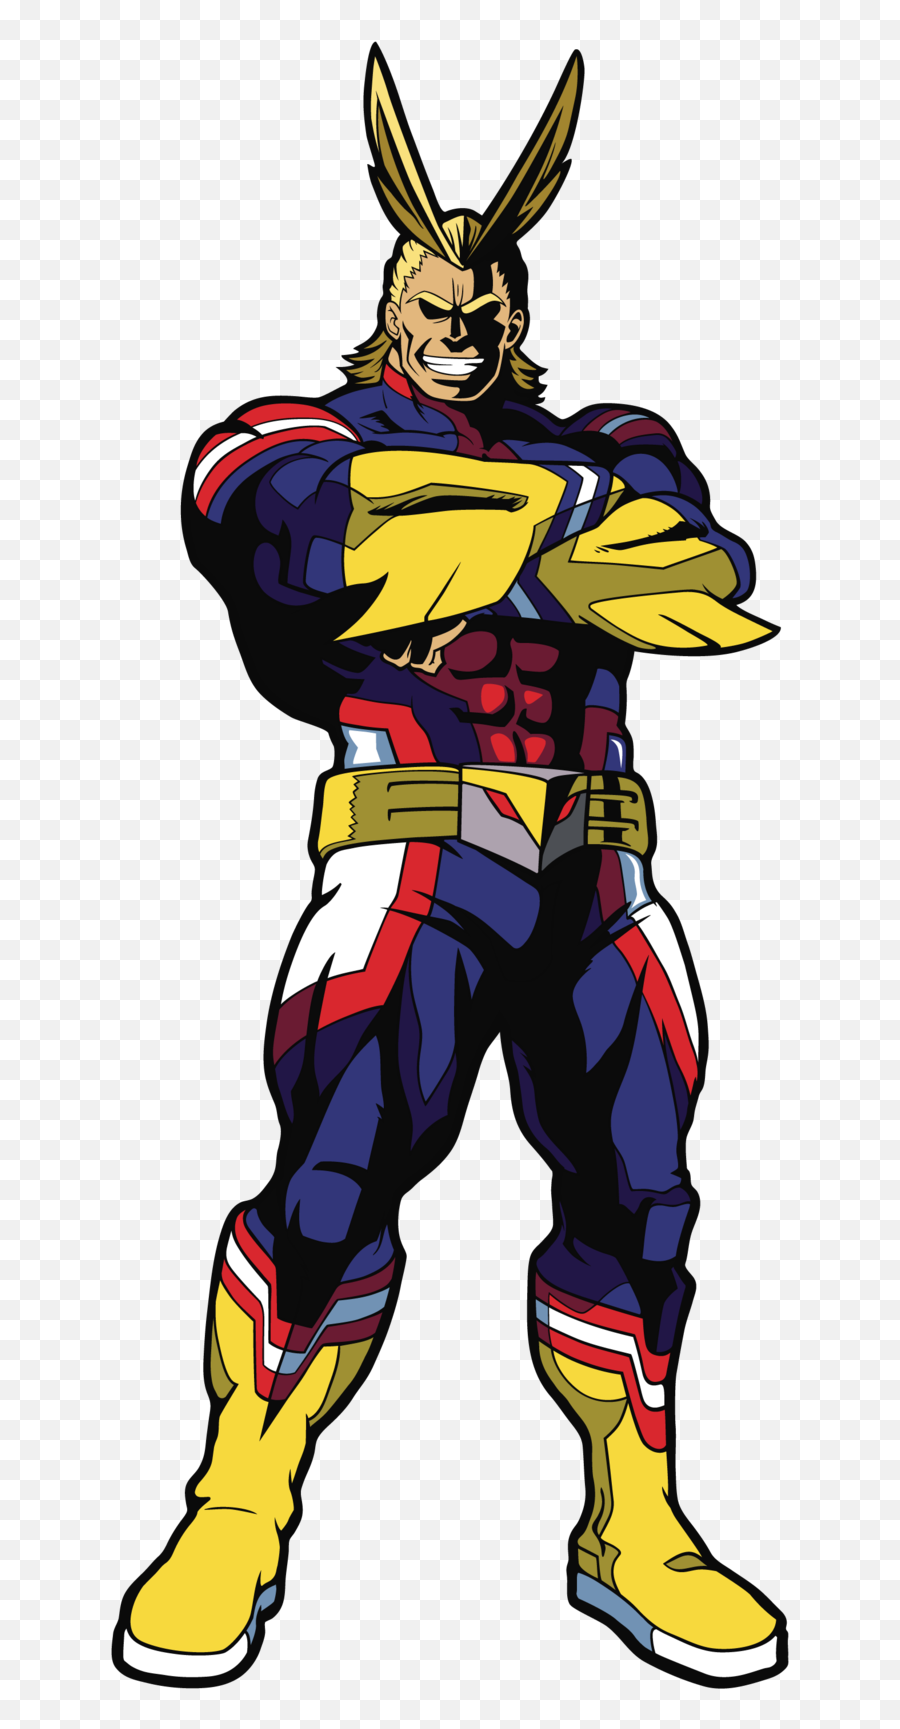 Download Hd All Might - All Might Crossing Arms Emoji,All Might Png